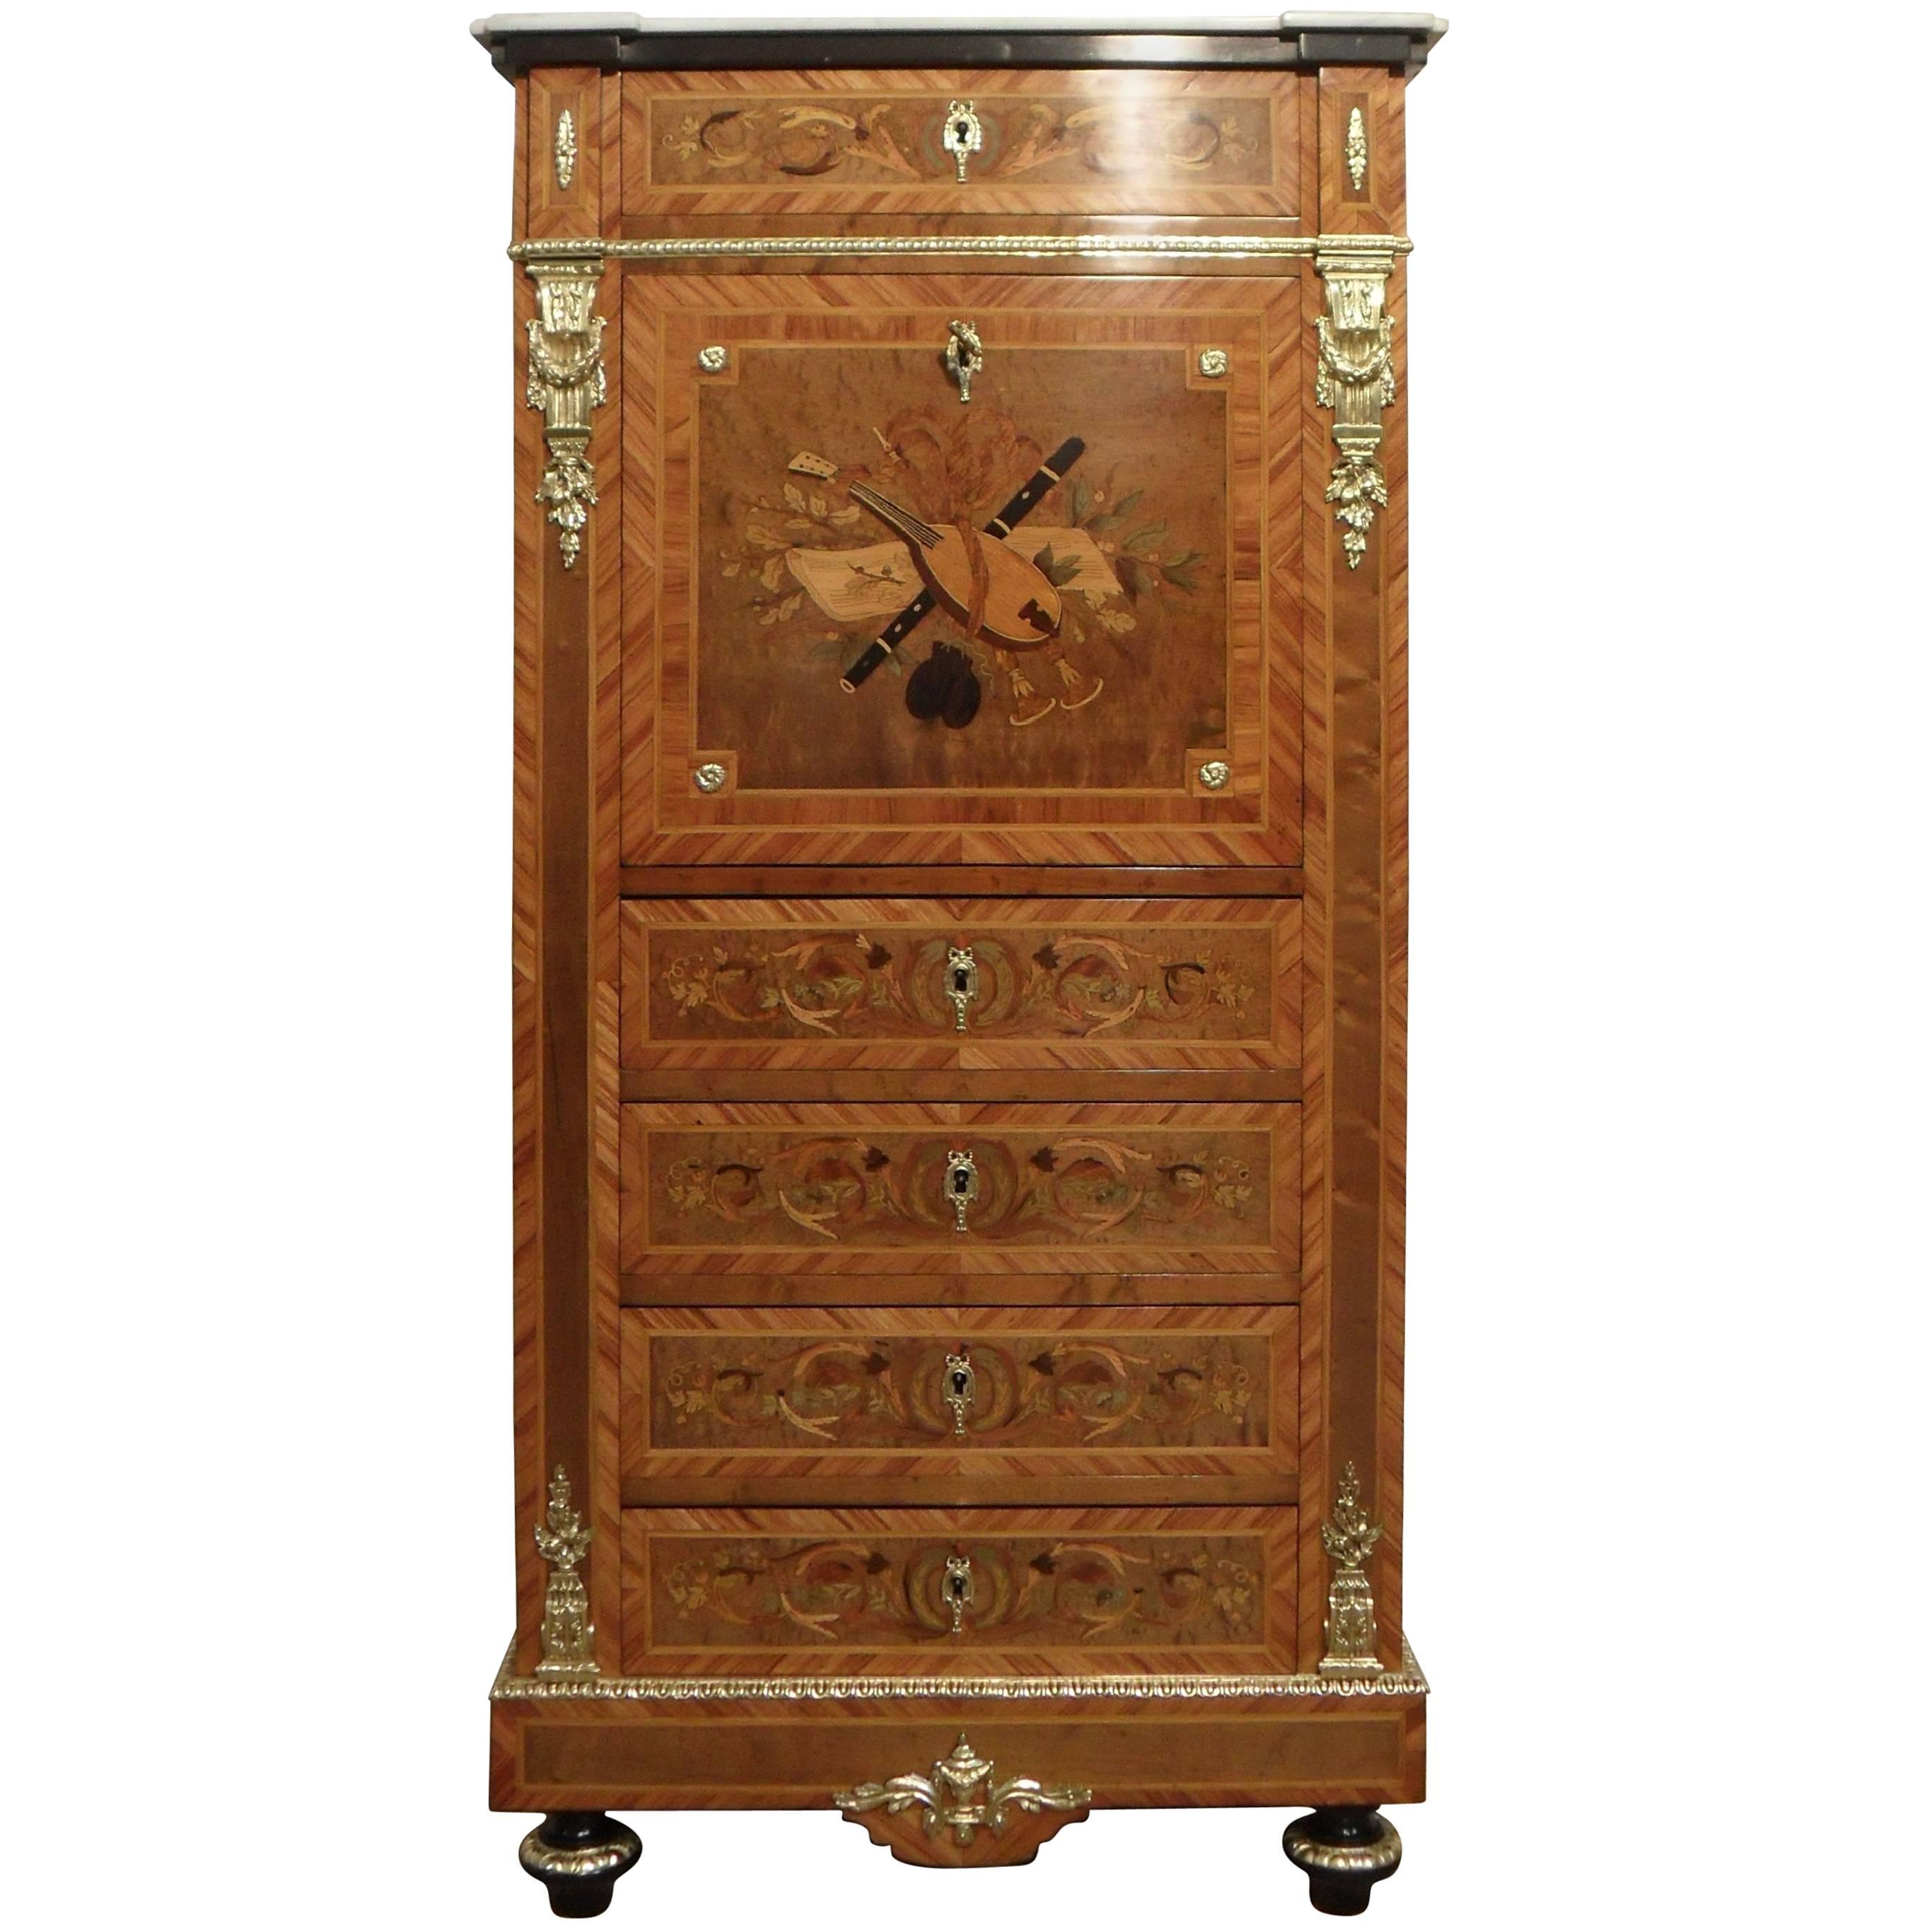 French 19th Century Marquetry Inlaid Escritoire Writing Cabinet